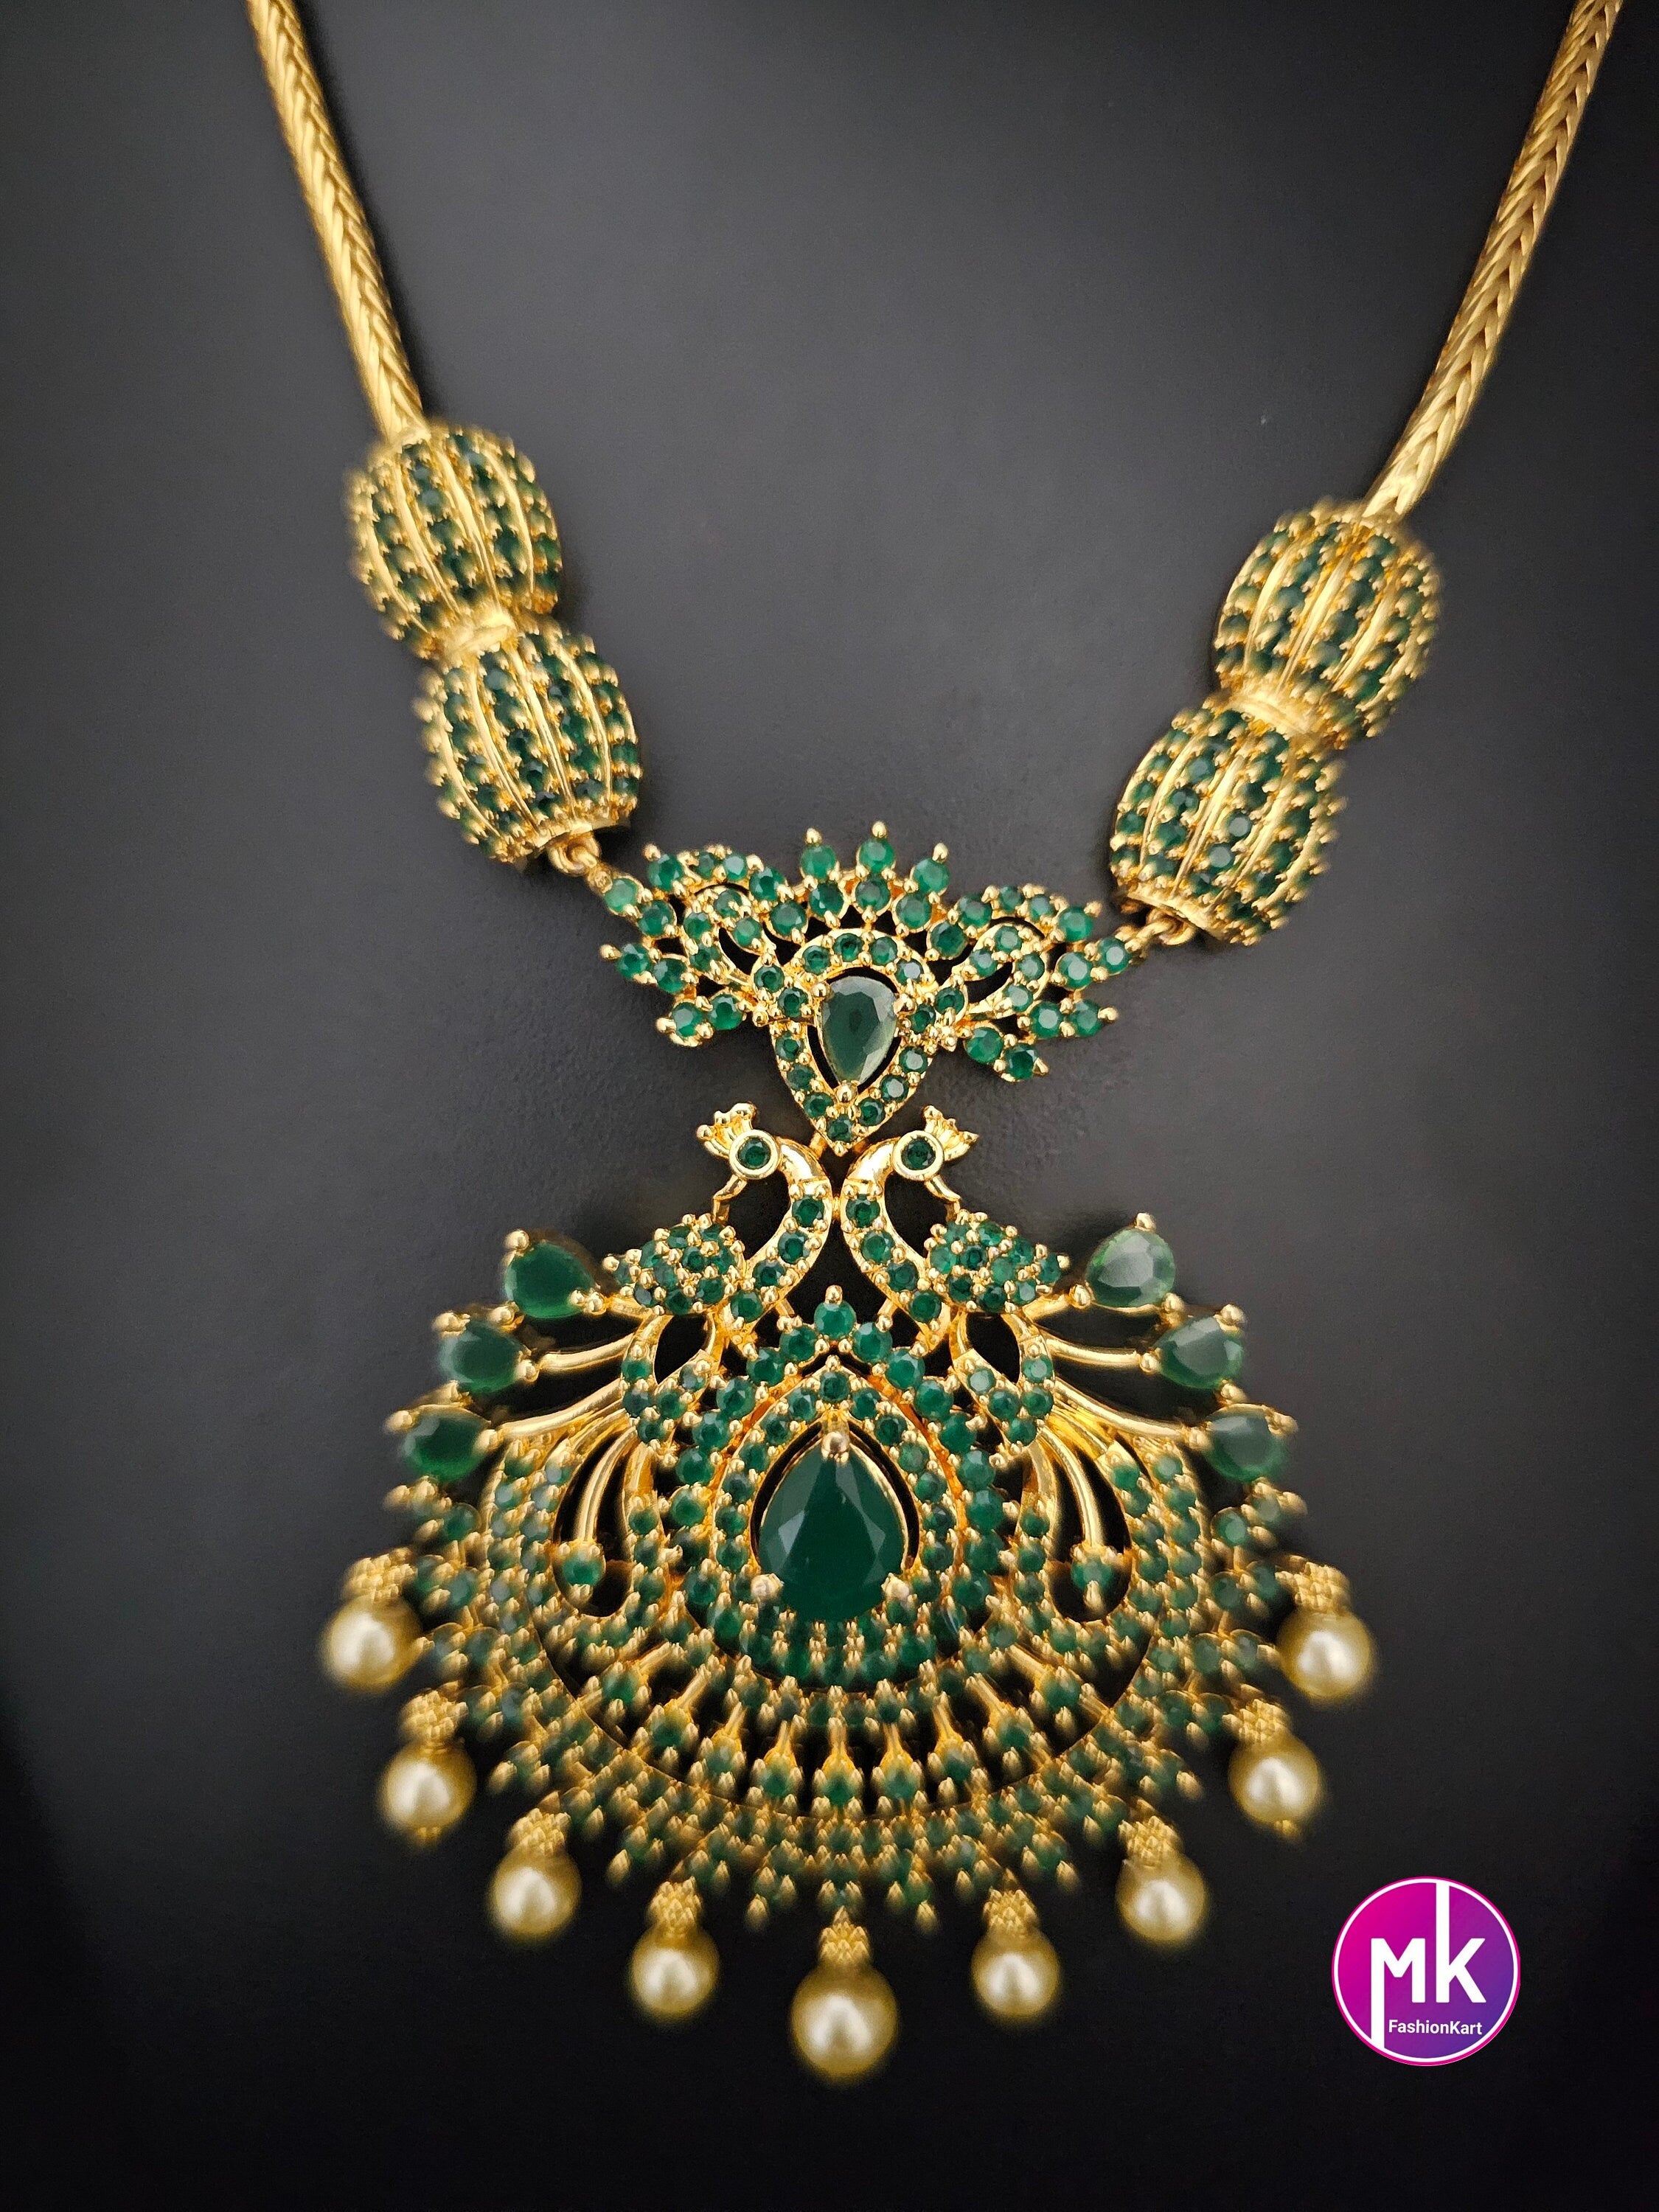 Premium Gold finish Peacock AD Emerald Stone Necklace with matching Earrings